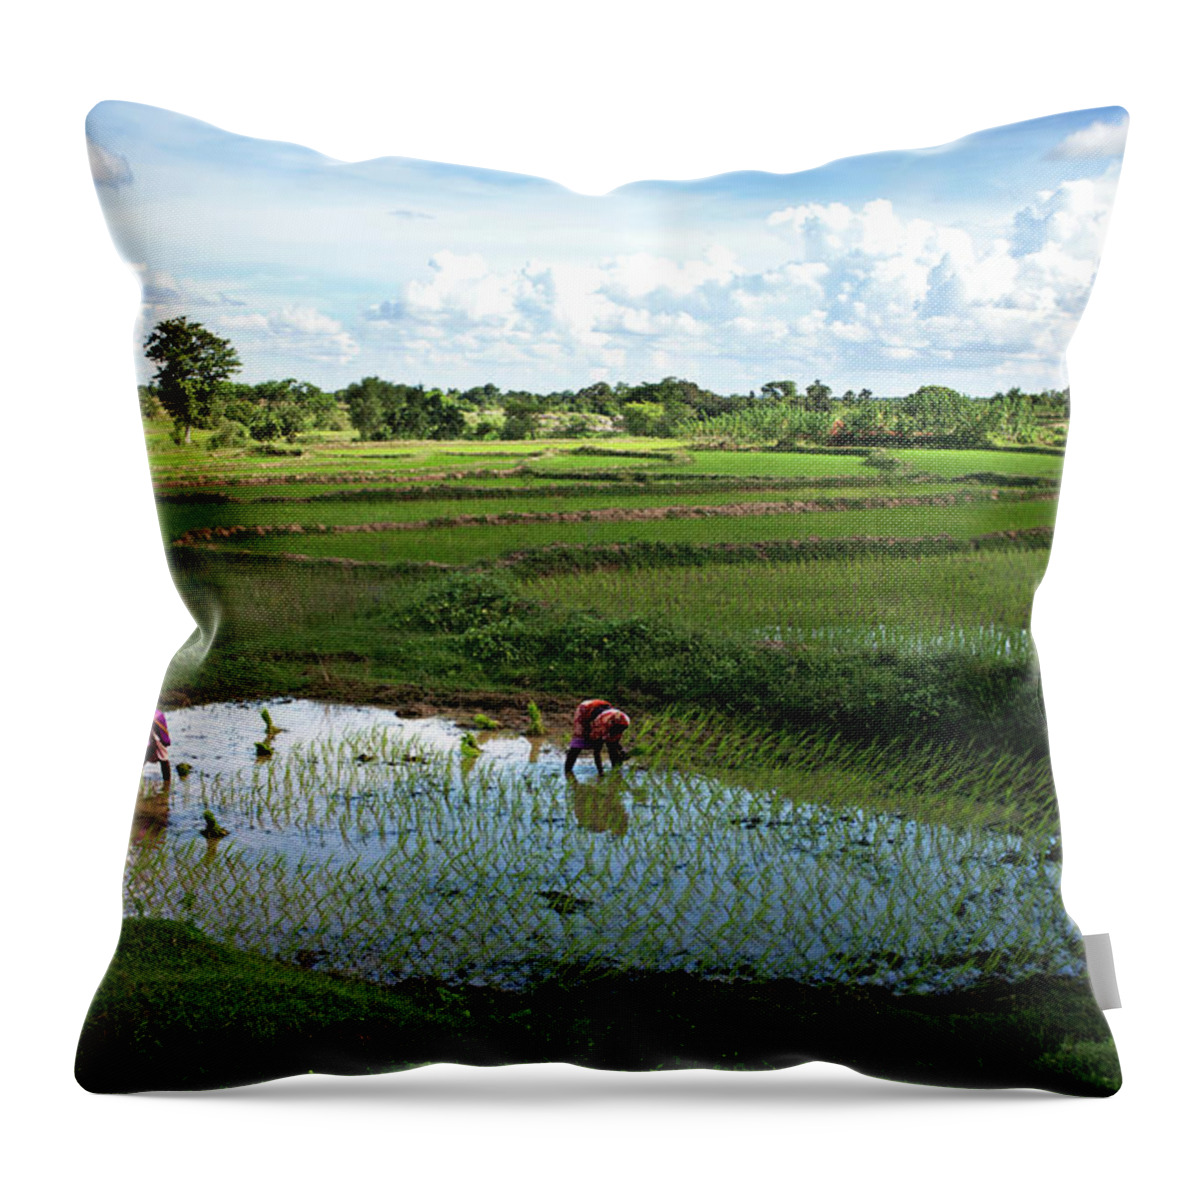 Tranquility Throw Pillow featuring the photograph Women Sowing Seeds In West Bengal,india by Partha Pal